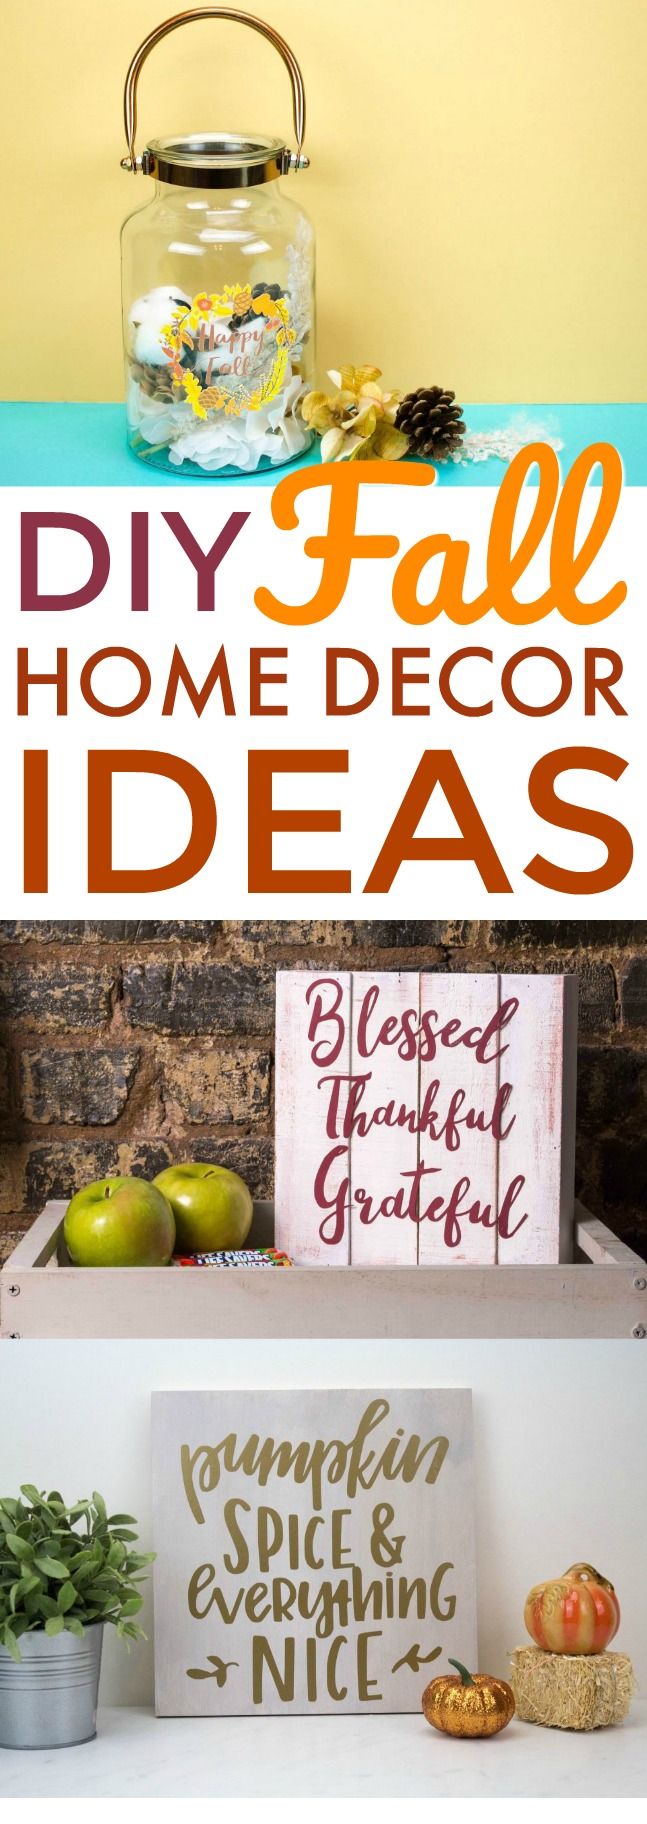 We still have time to make some DIY Fall Home Decor Ideas like these. All of th...